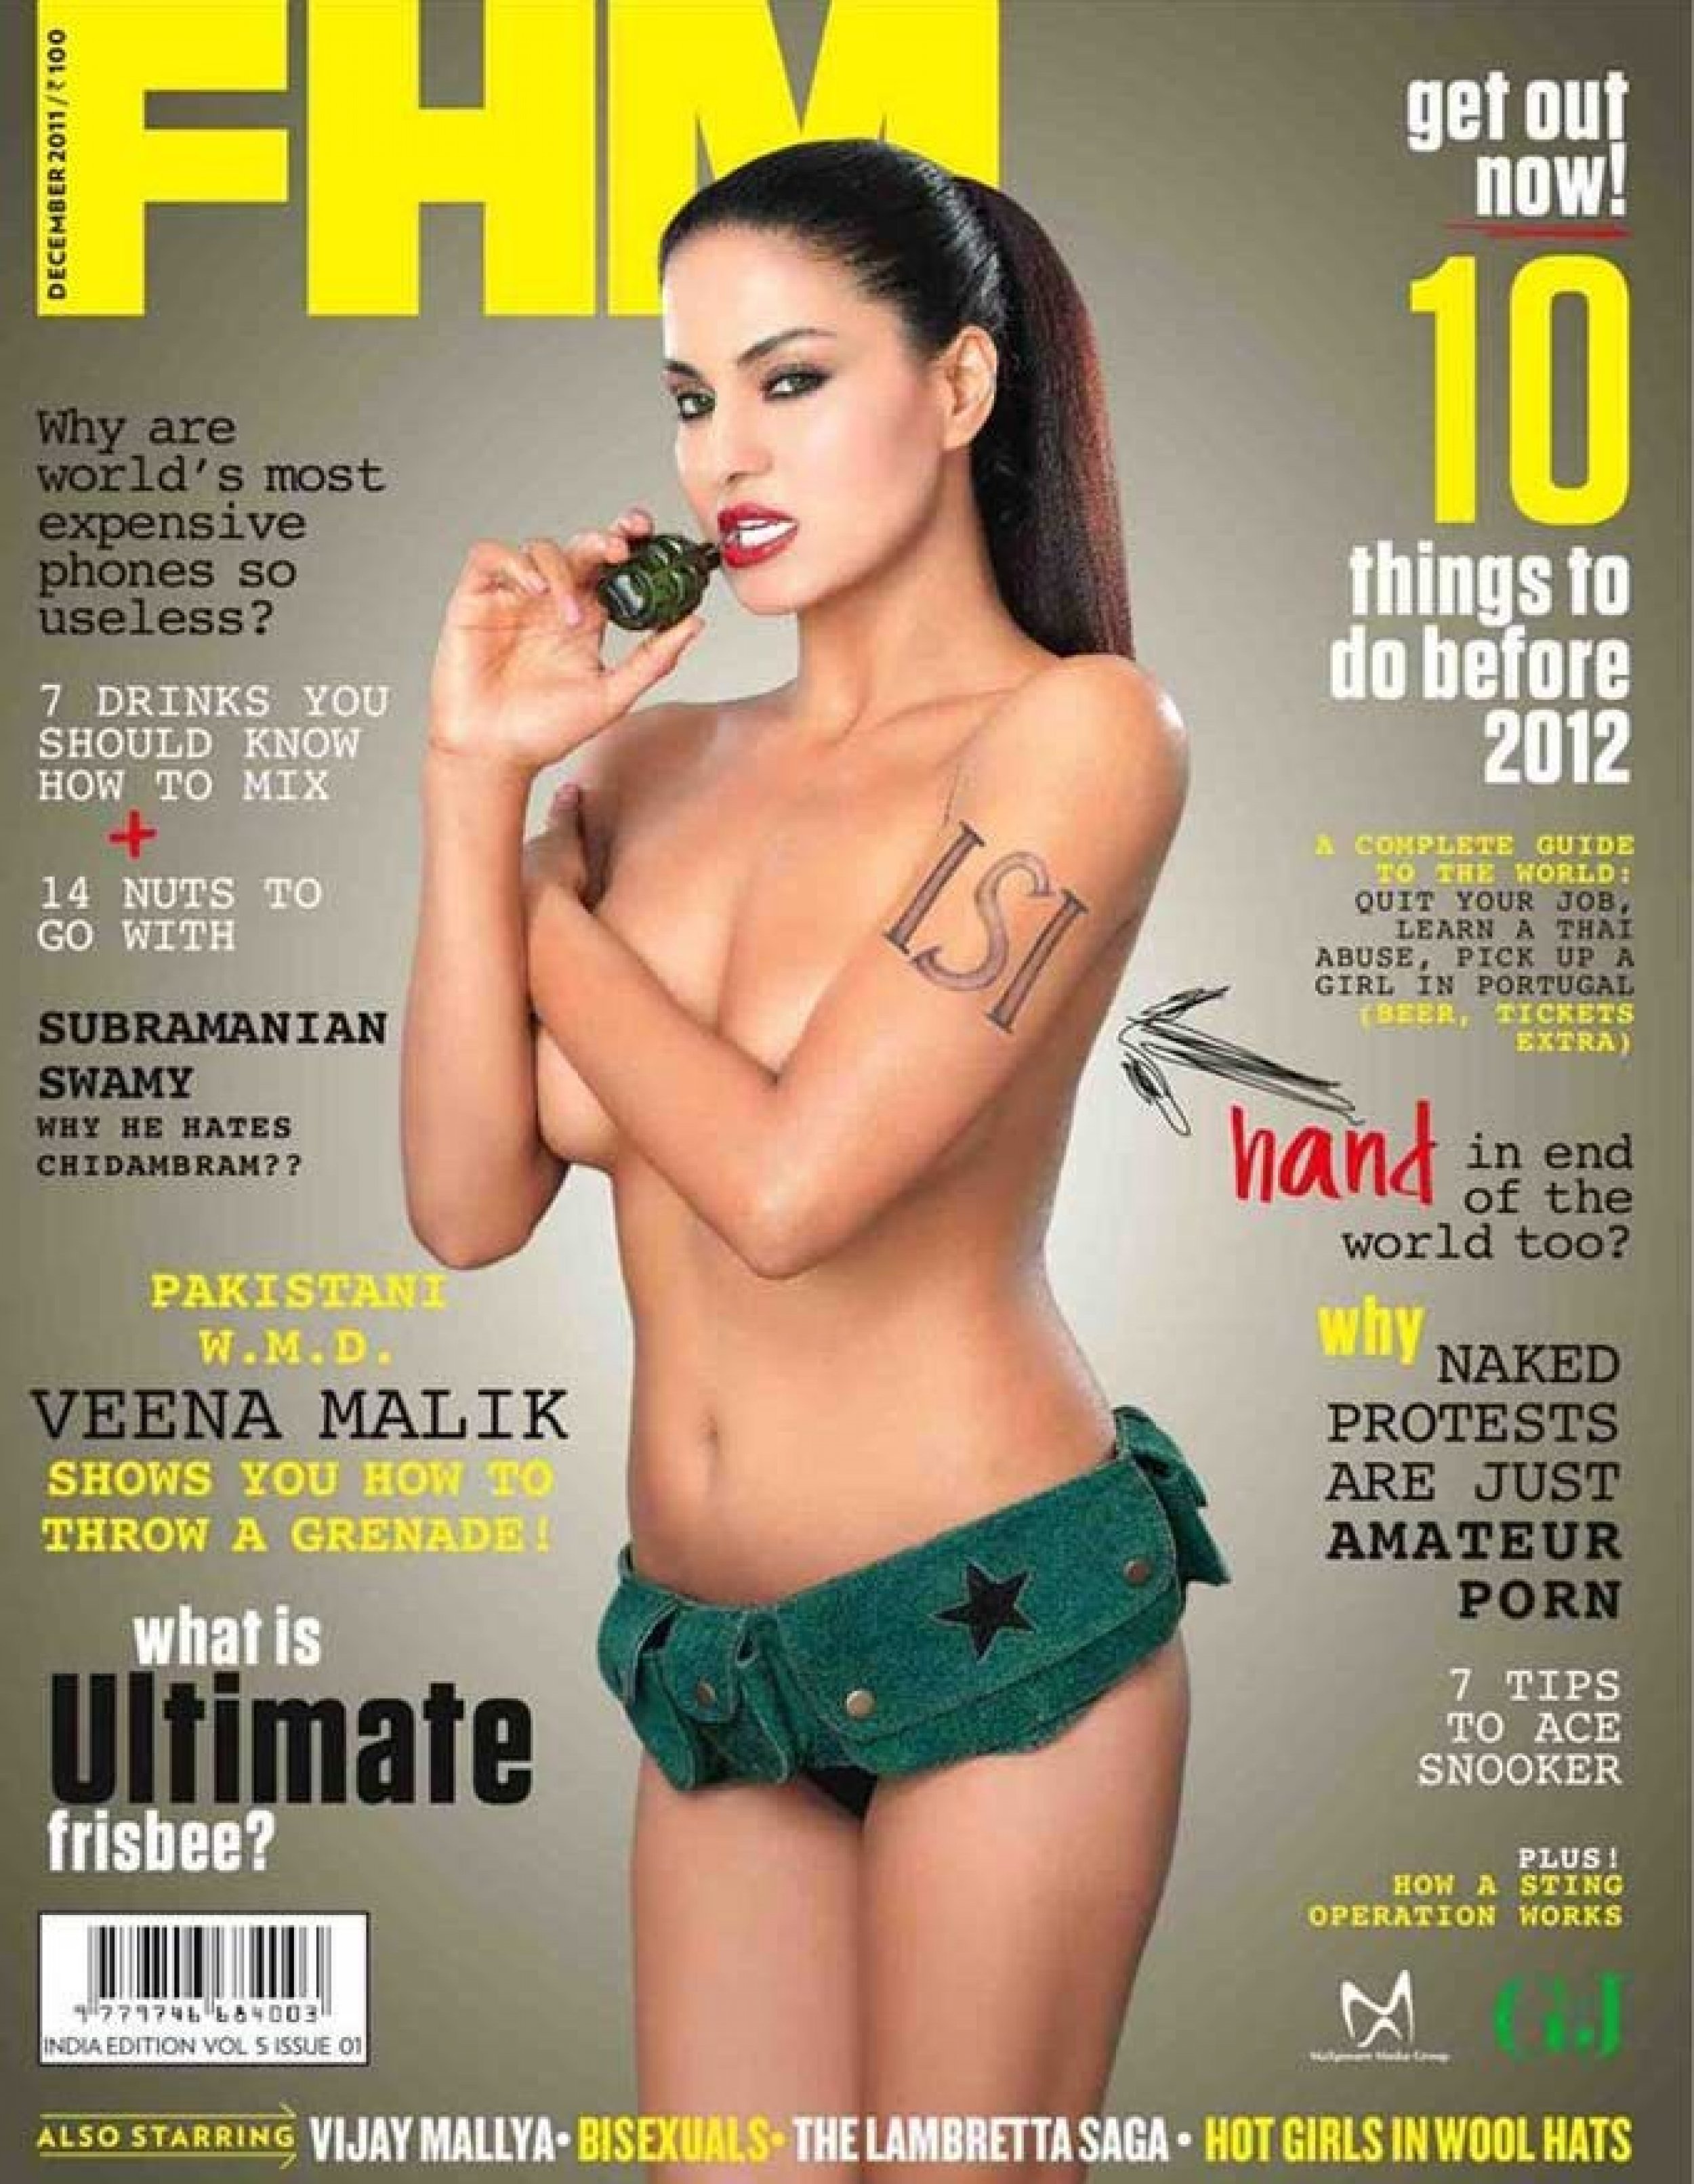 Veena Malik FHM India Cover Shame for All Muslims, Father Has Disowned Her IBTimes photo